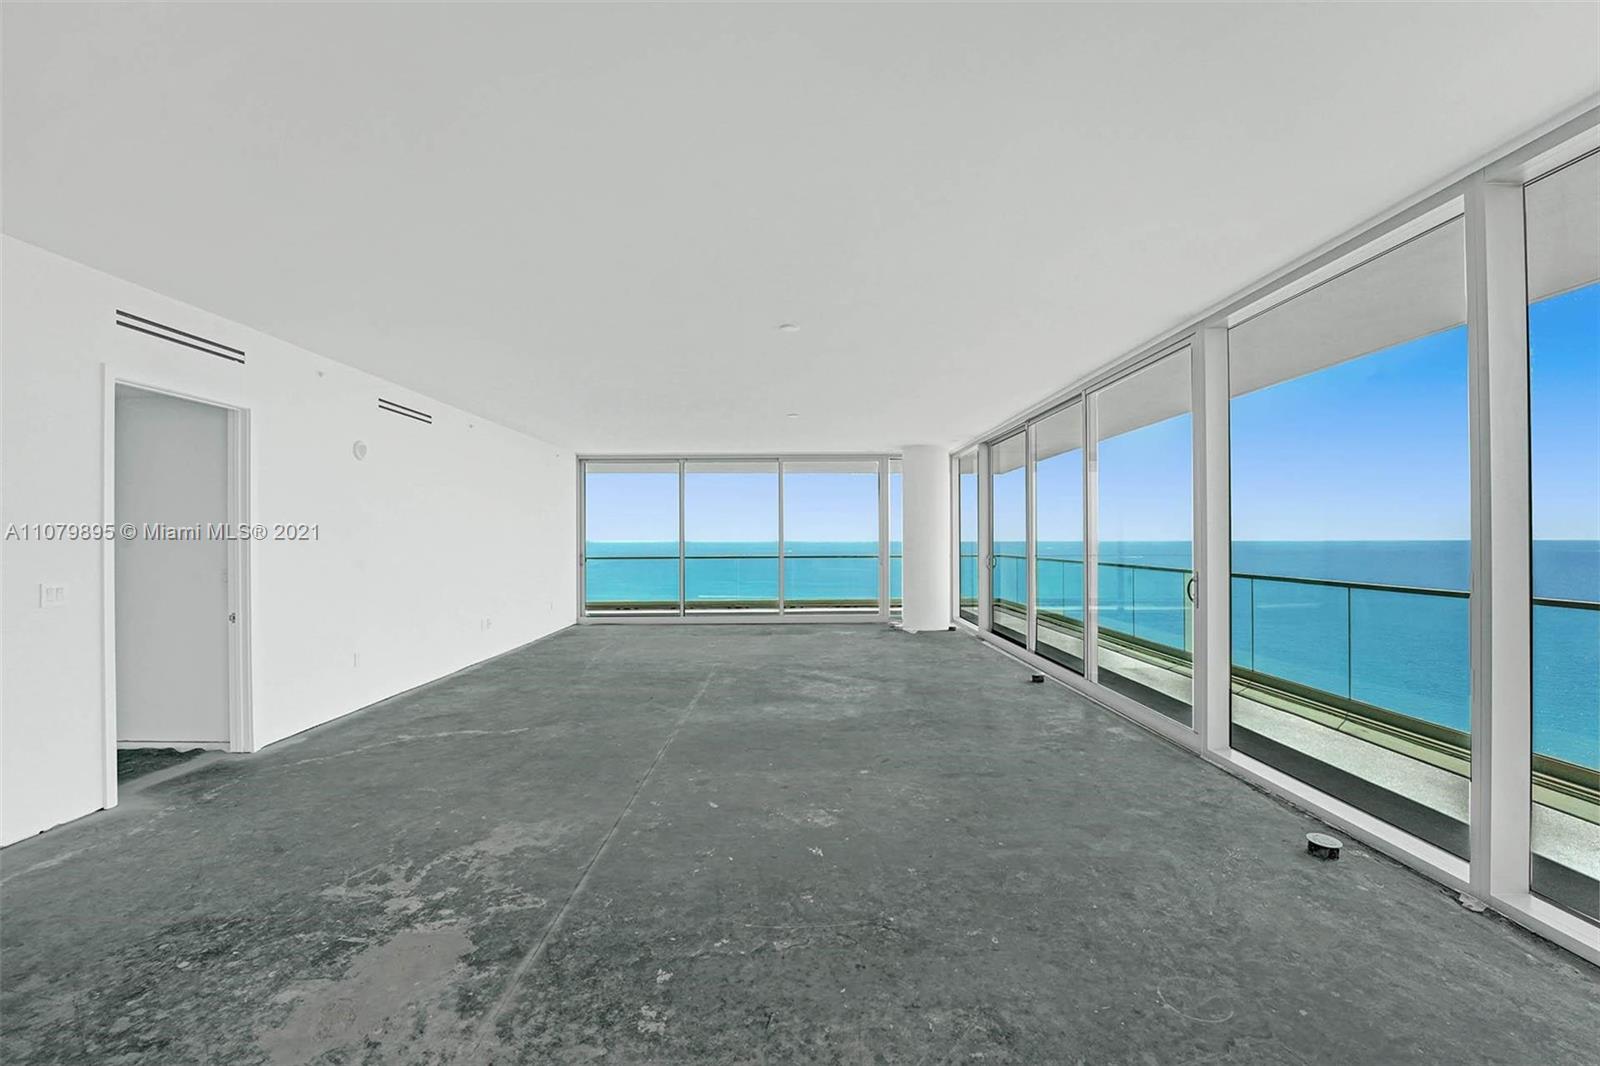 Photo 2 of Oceana Bal Harbour South Apt 2401 in Bal Harbour - MLS A11079895